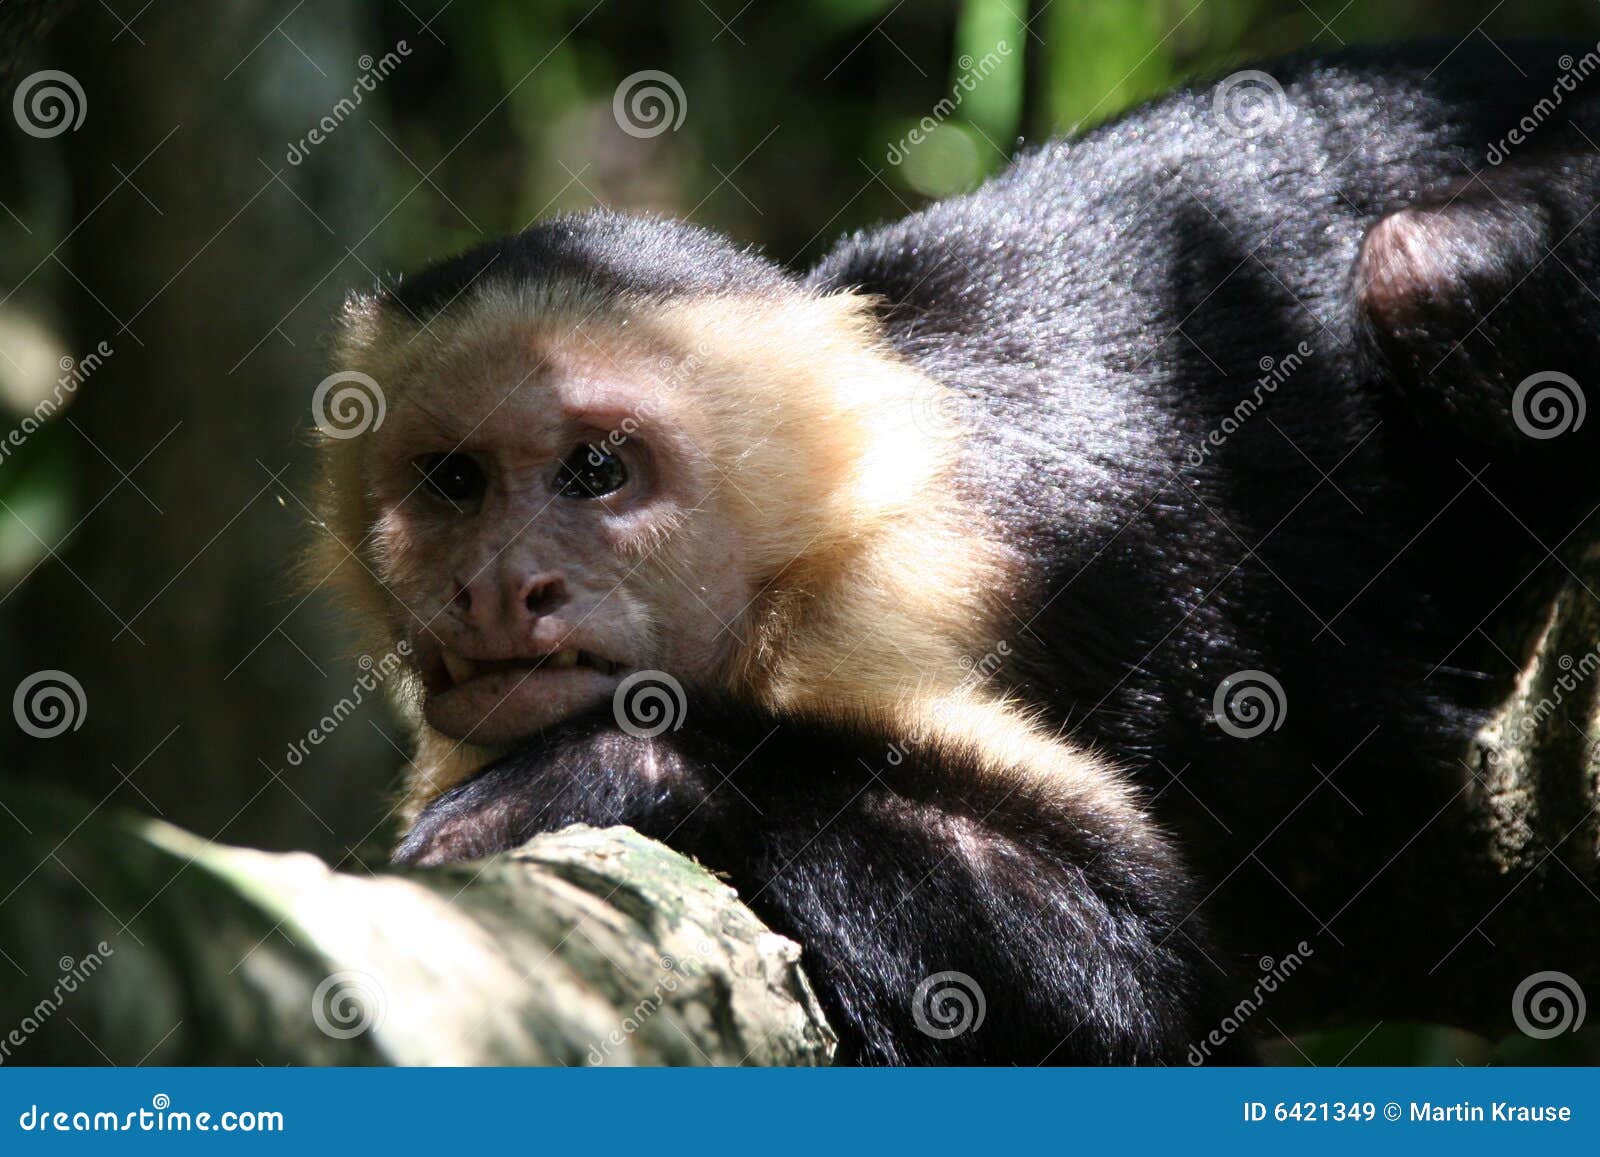 257 Ugly Monkey Photos Free Royalty Free Stock Photos From Dreamstime